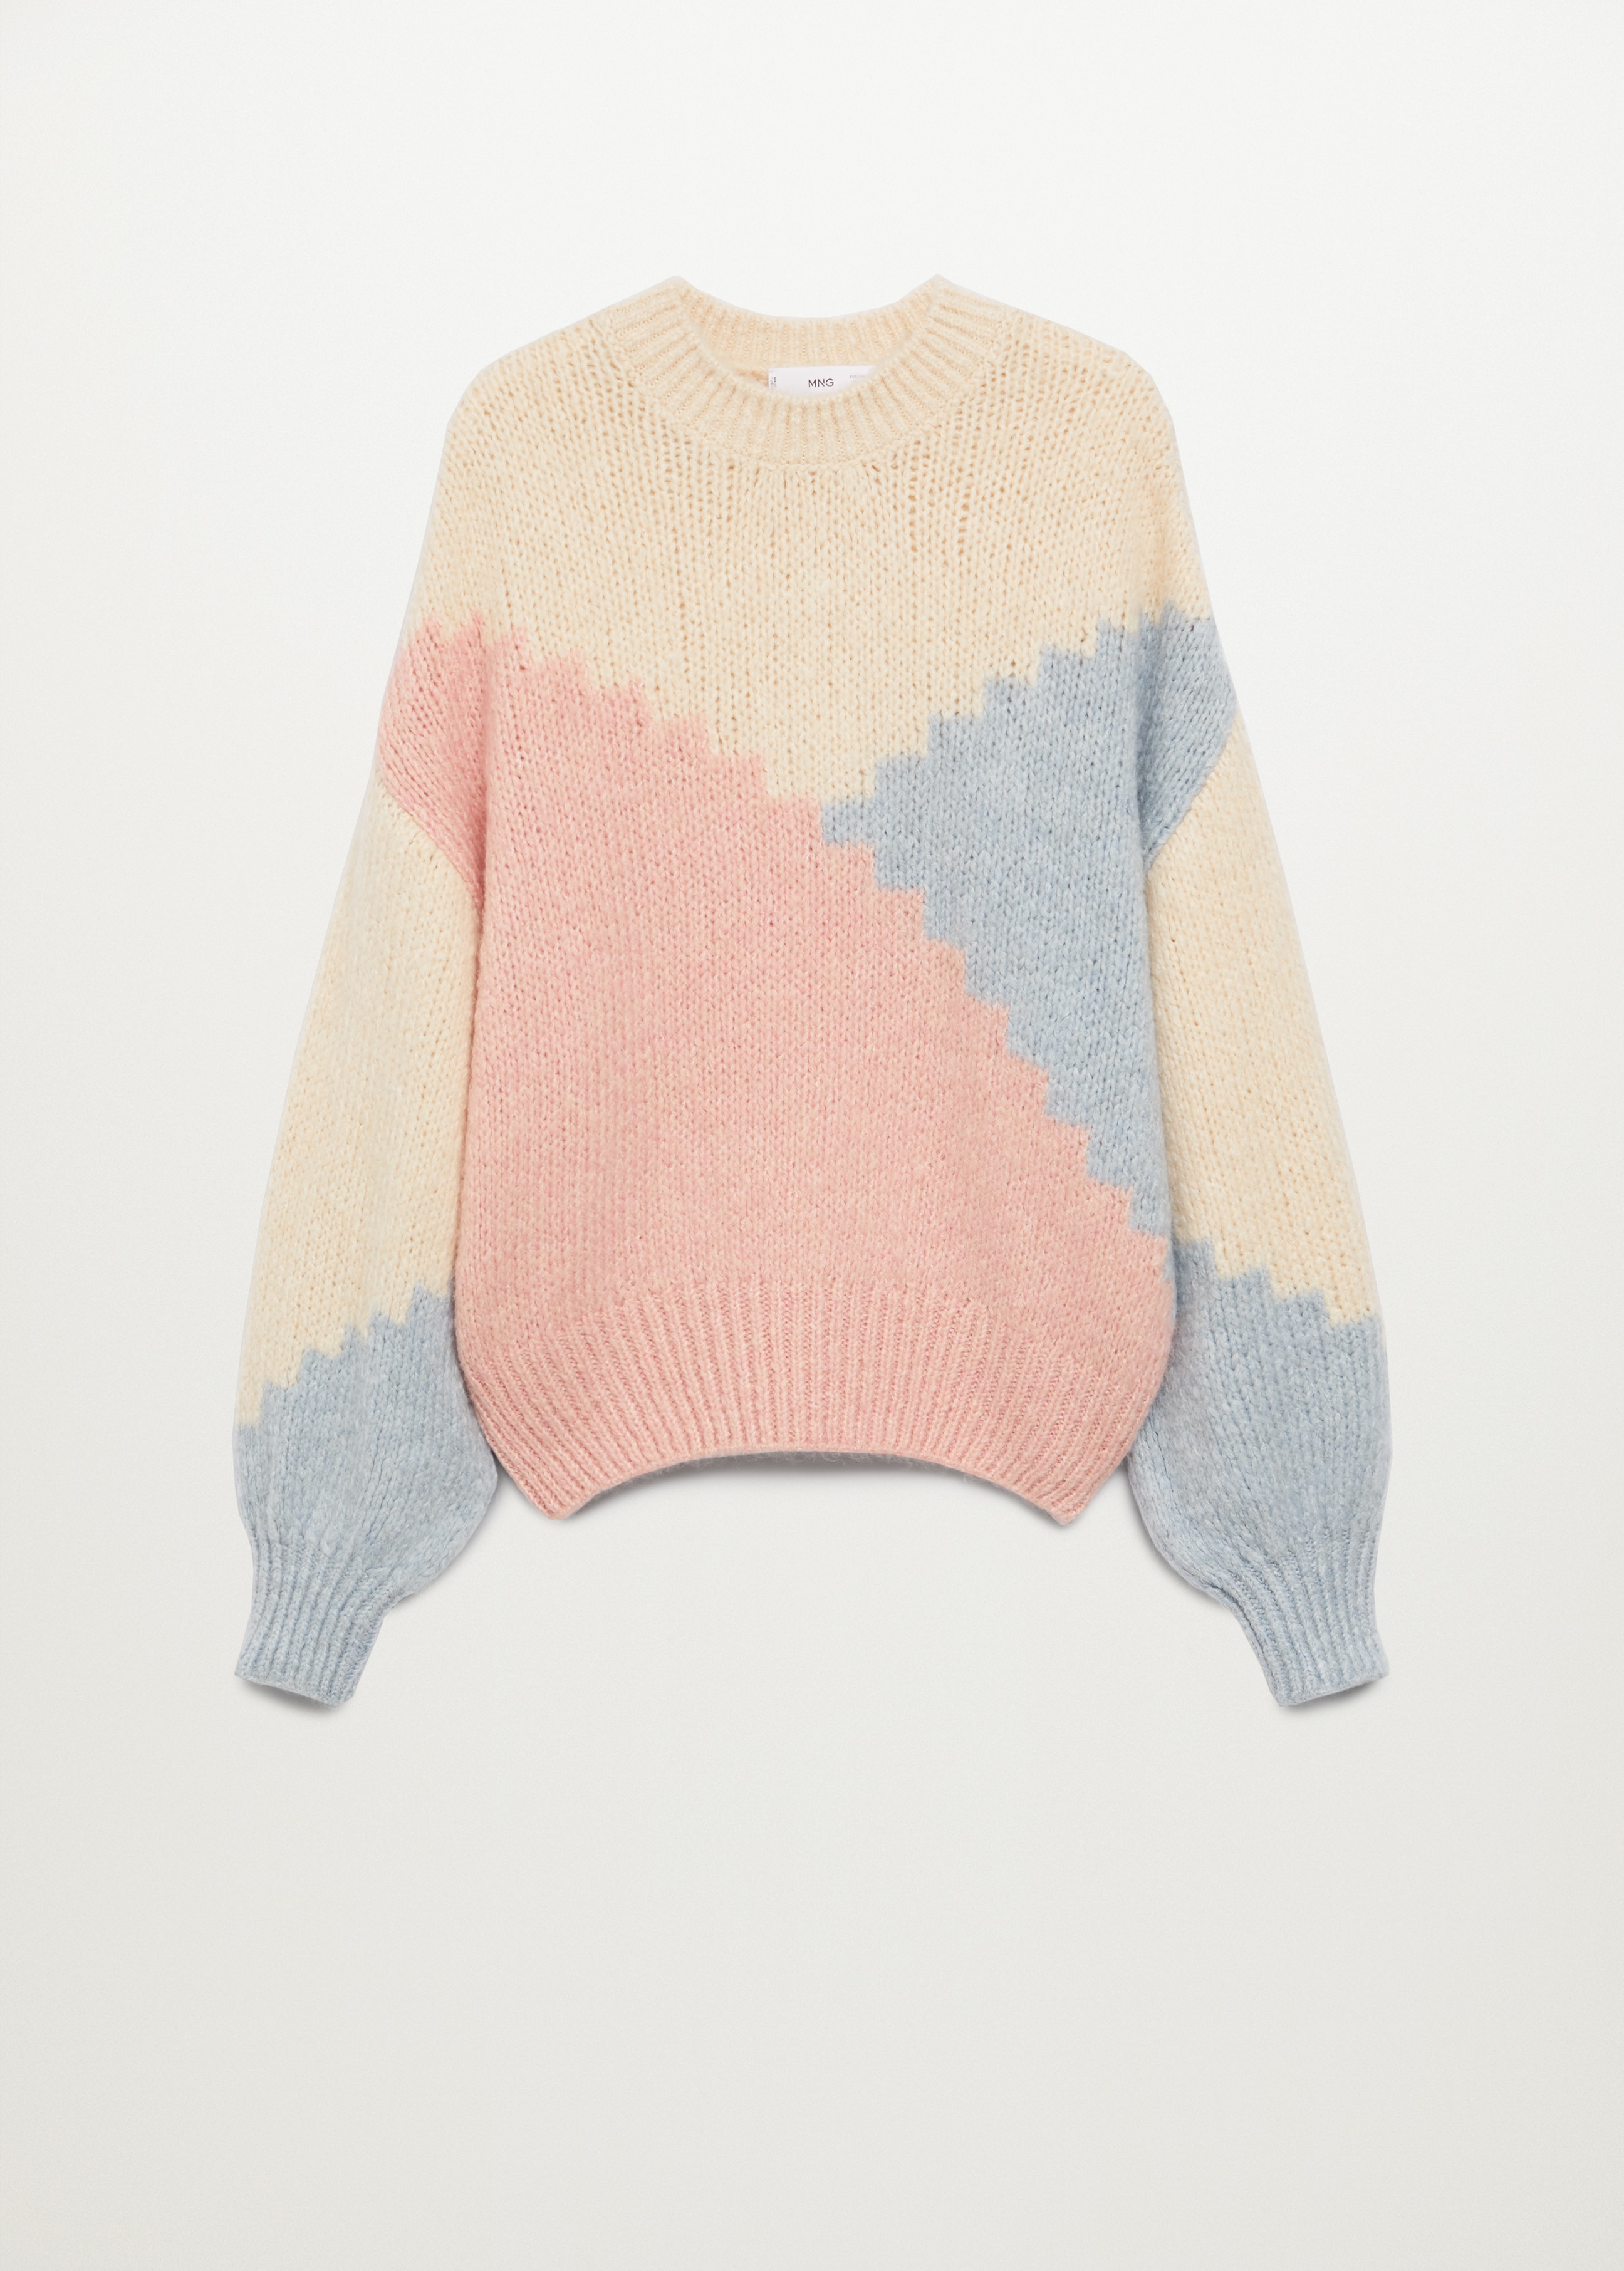 Multi-colored knit sweater - Article without model